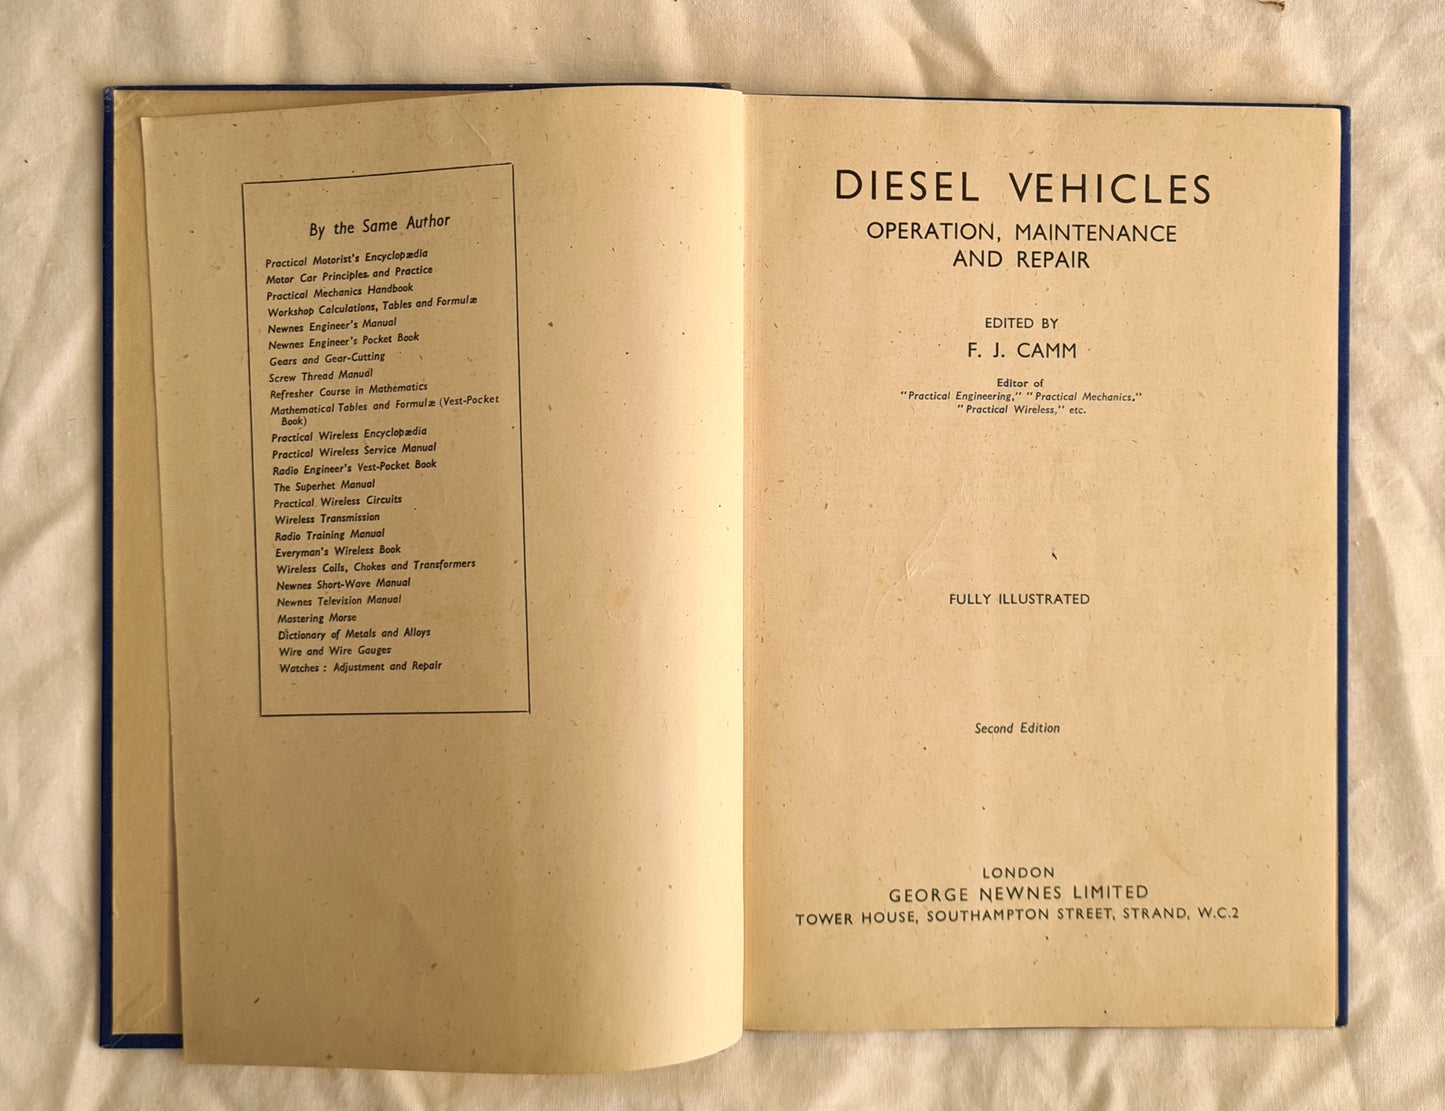 Diesel Vehicles: Operation, Maintenance and Repair by F. J. Camm